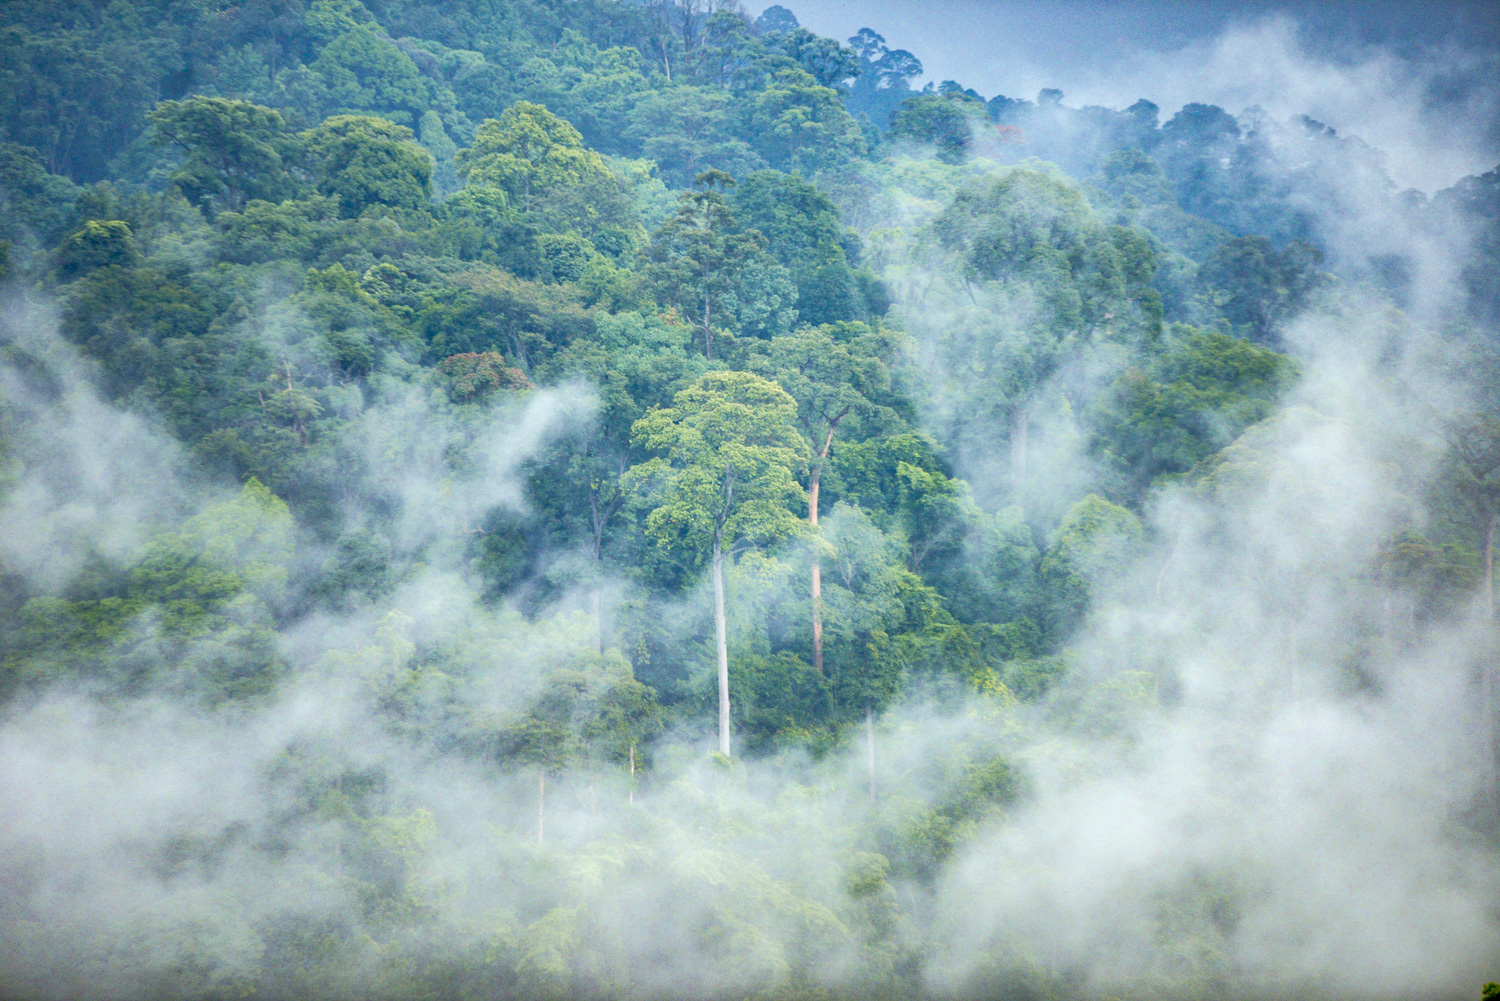 A misty view from Spyder Hill showcasing the Mama and Papa trees in the Berembun Forest Reserve.